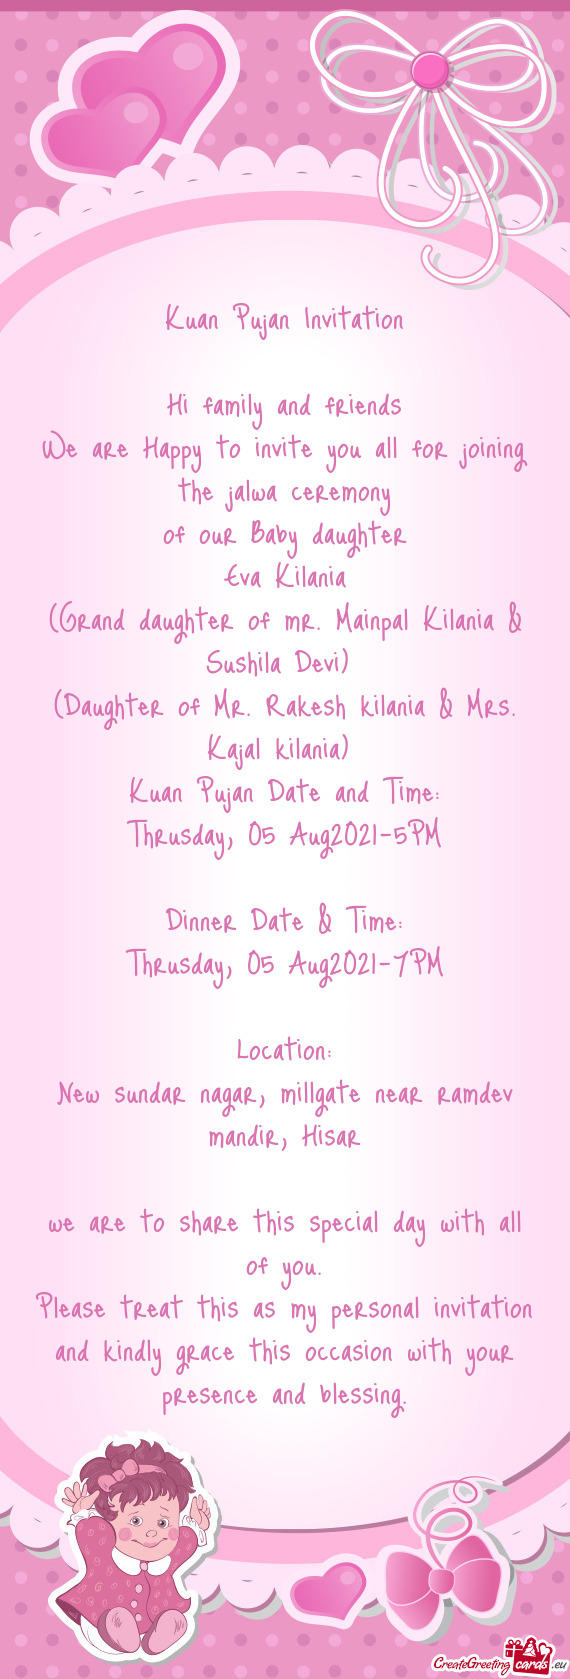 Kuan Pujan Date and Time: